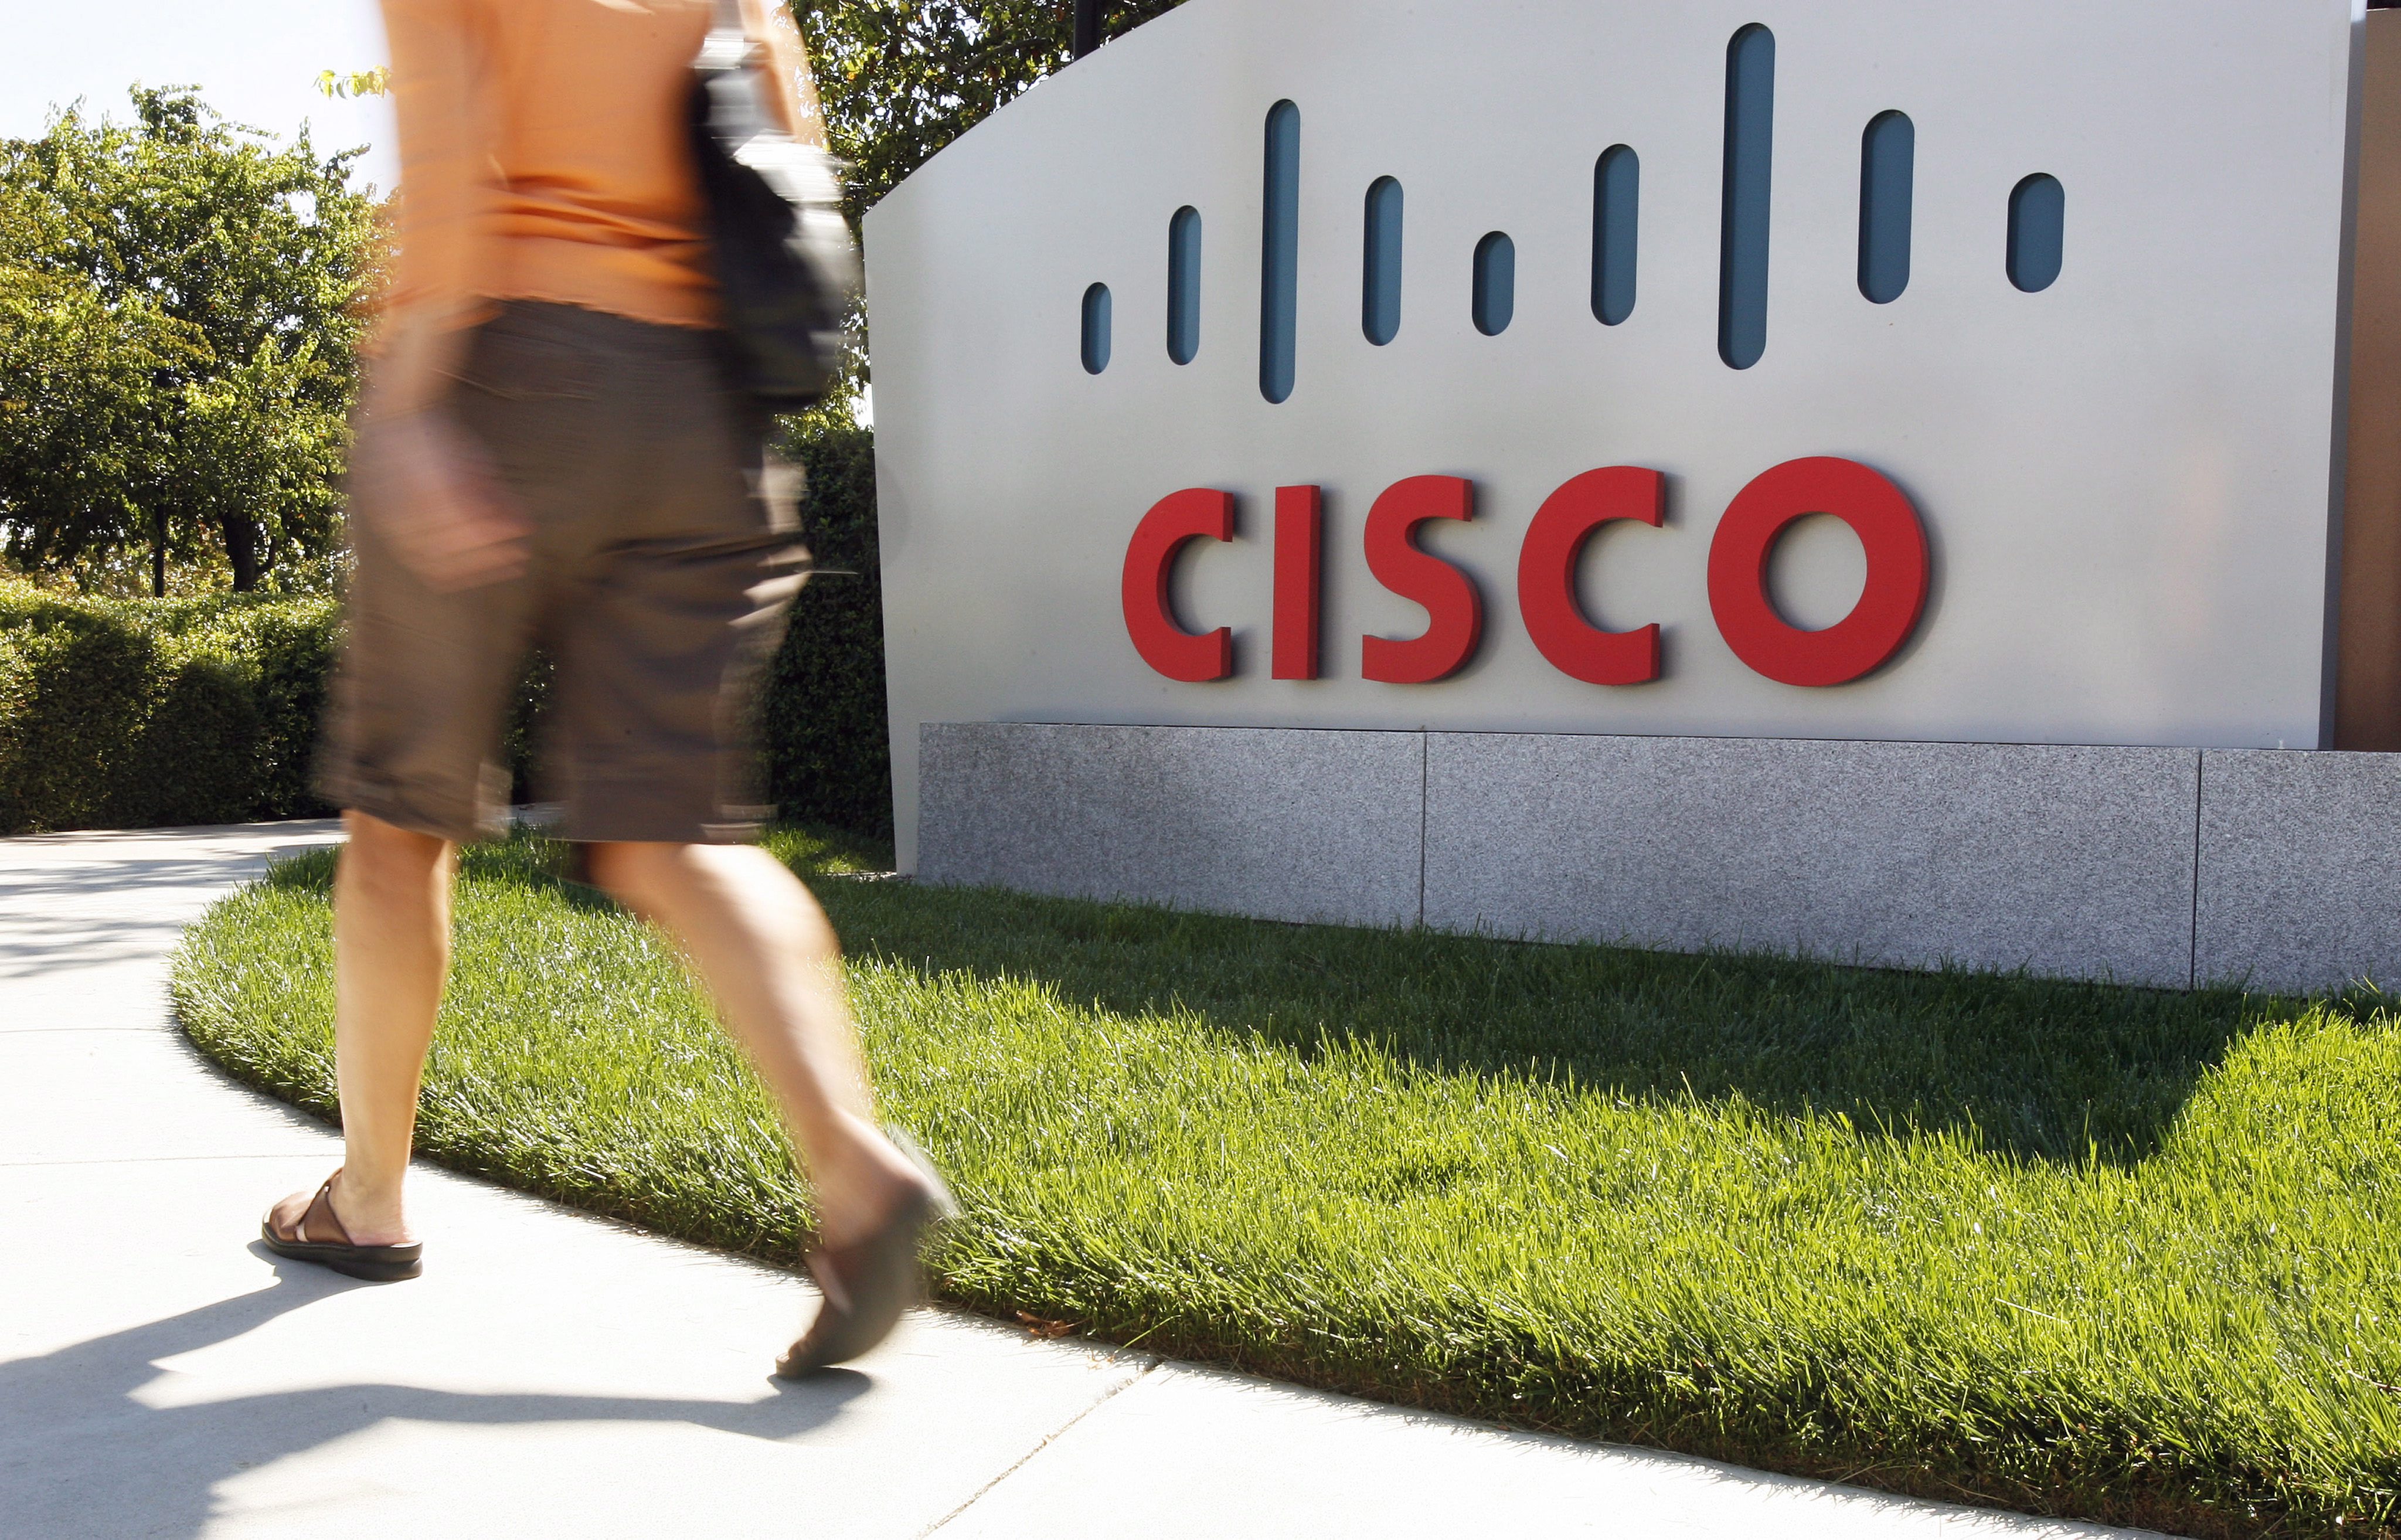 2010-09-29 13:58:16 epa02830888 (FILE) A file picture dated 29 September 2010 shows a sign at the Cisco Systems Inc., headquarters in San Jose, California, USA. Cisco Systems Inc, the maker of networking gear, announced on 18 July 2011 plans to cut about 6,500 workers to help trim 1.3 billion US dollars in annual costs. EPA/MONICA M. DAVEY